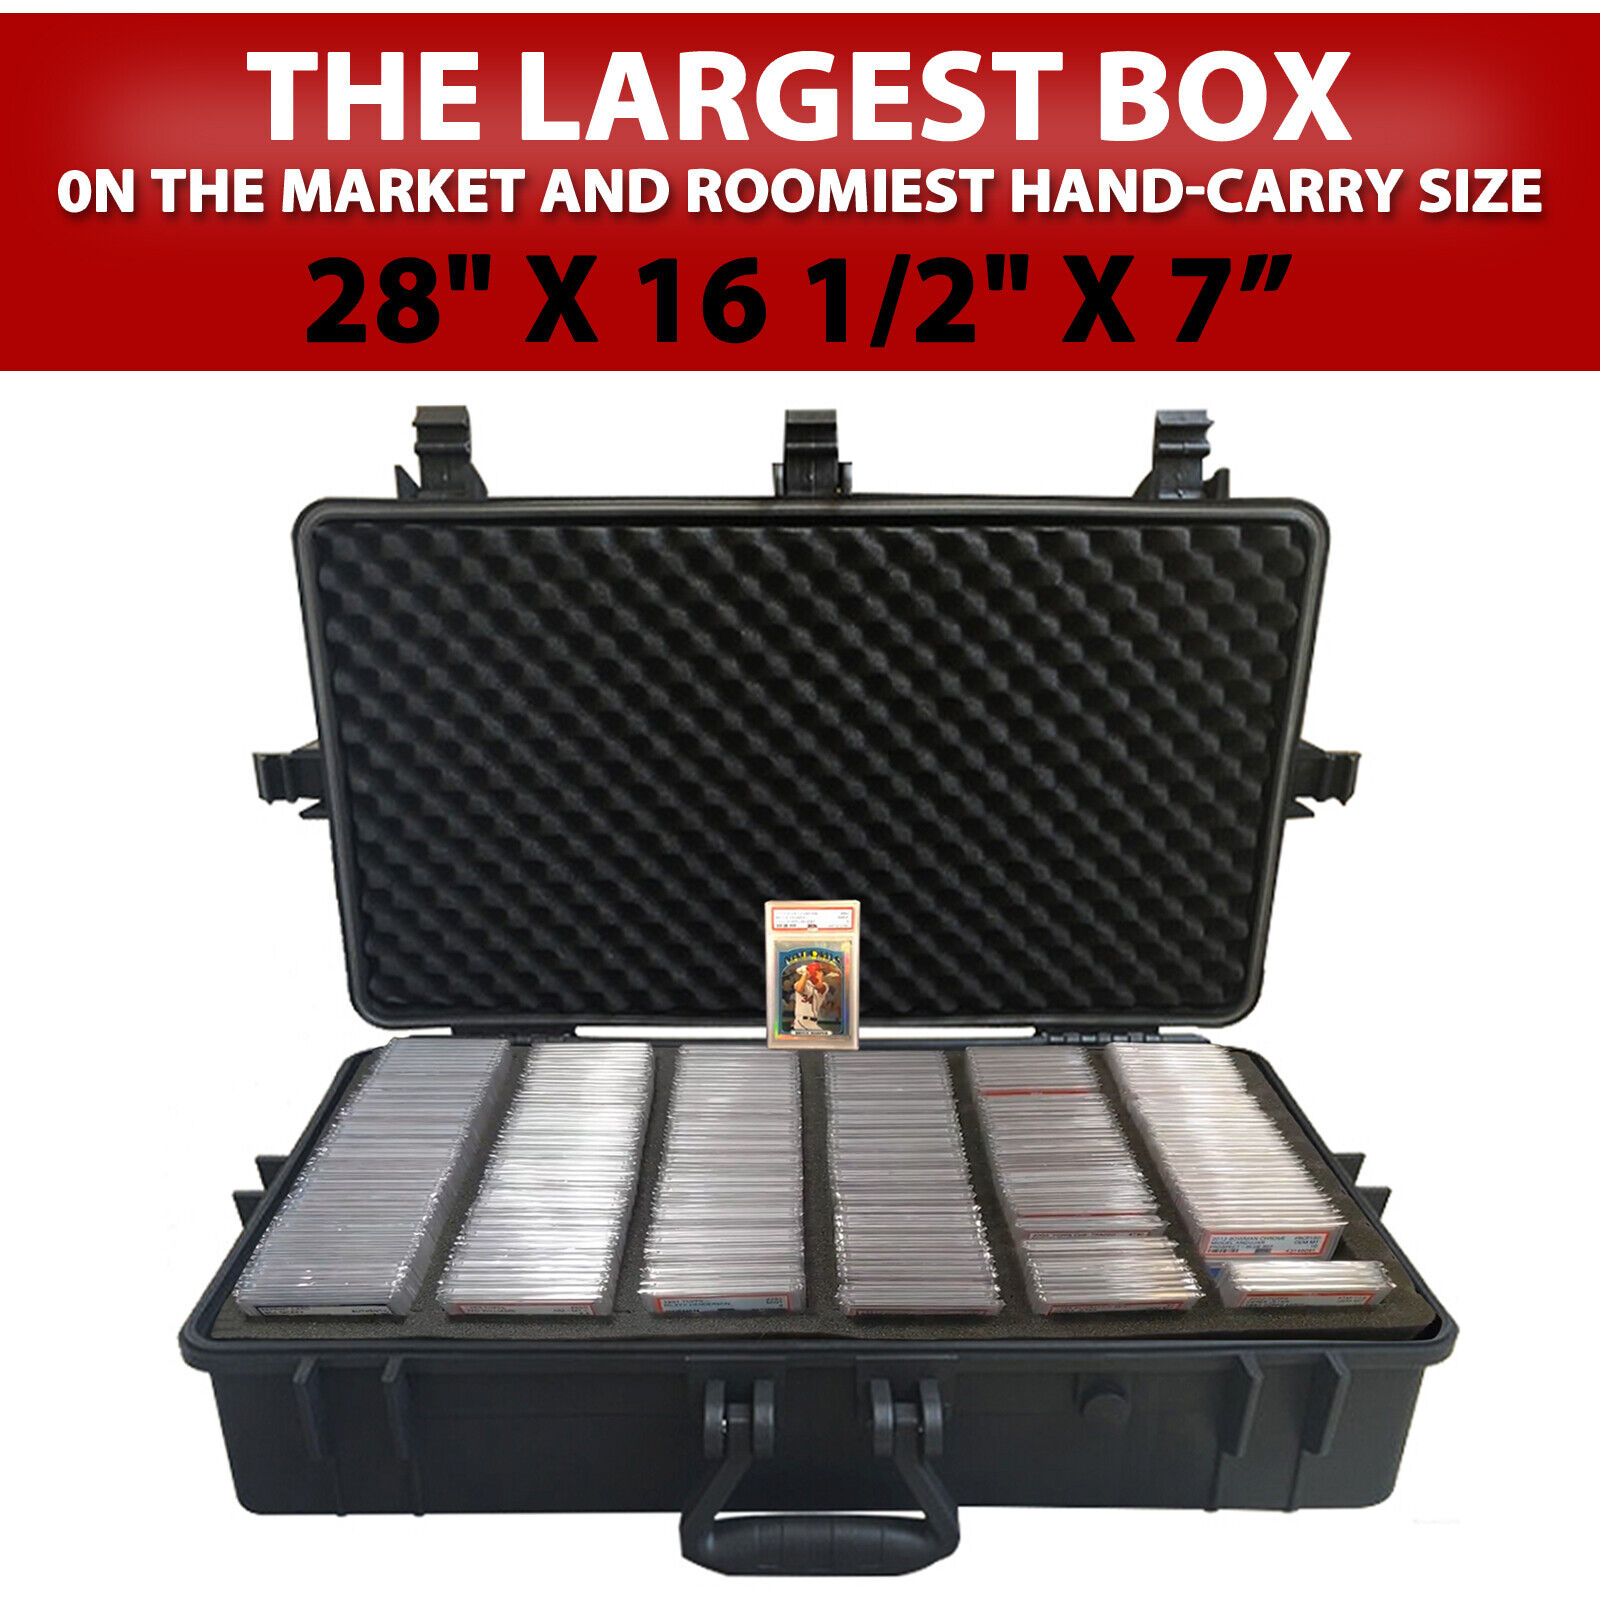 Graded Card Case Storage Box For 300+ BGS PSA Sports Trading Cards Waterproof